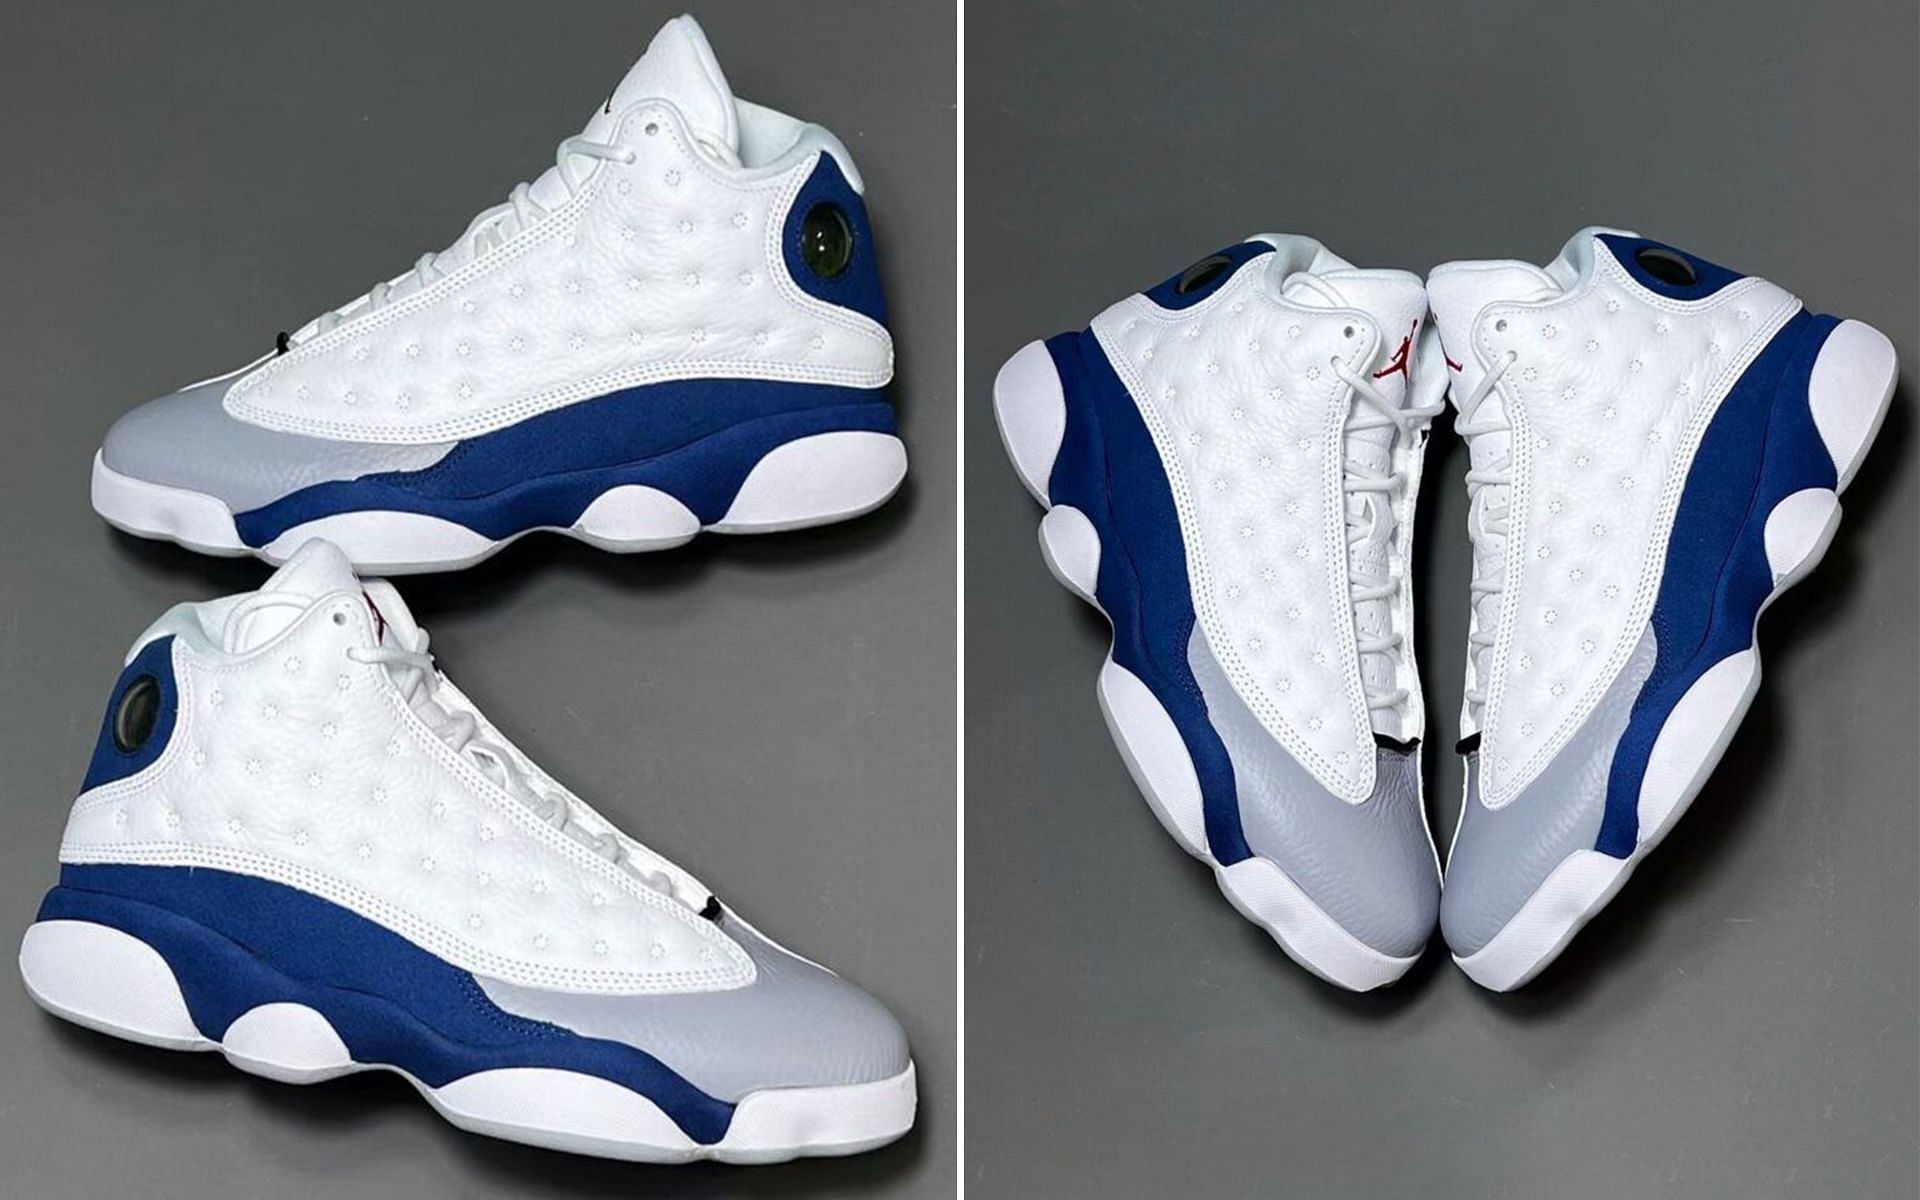 First look of AJ13 French Blue (Image via SBD)